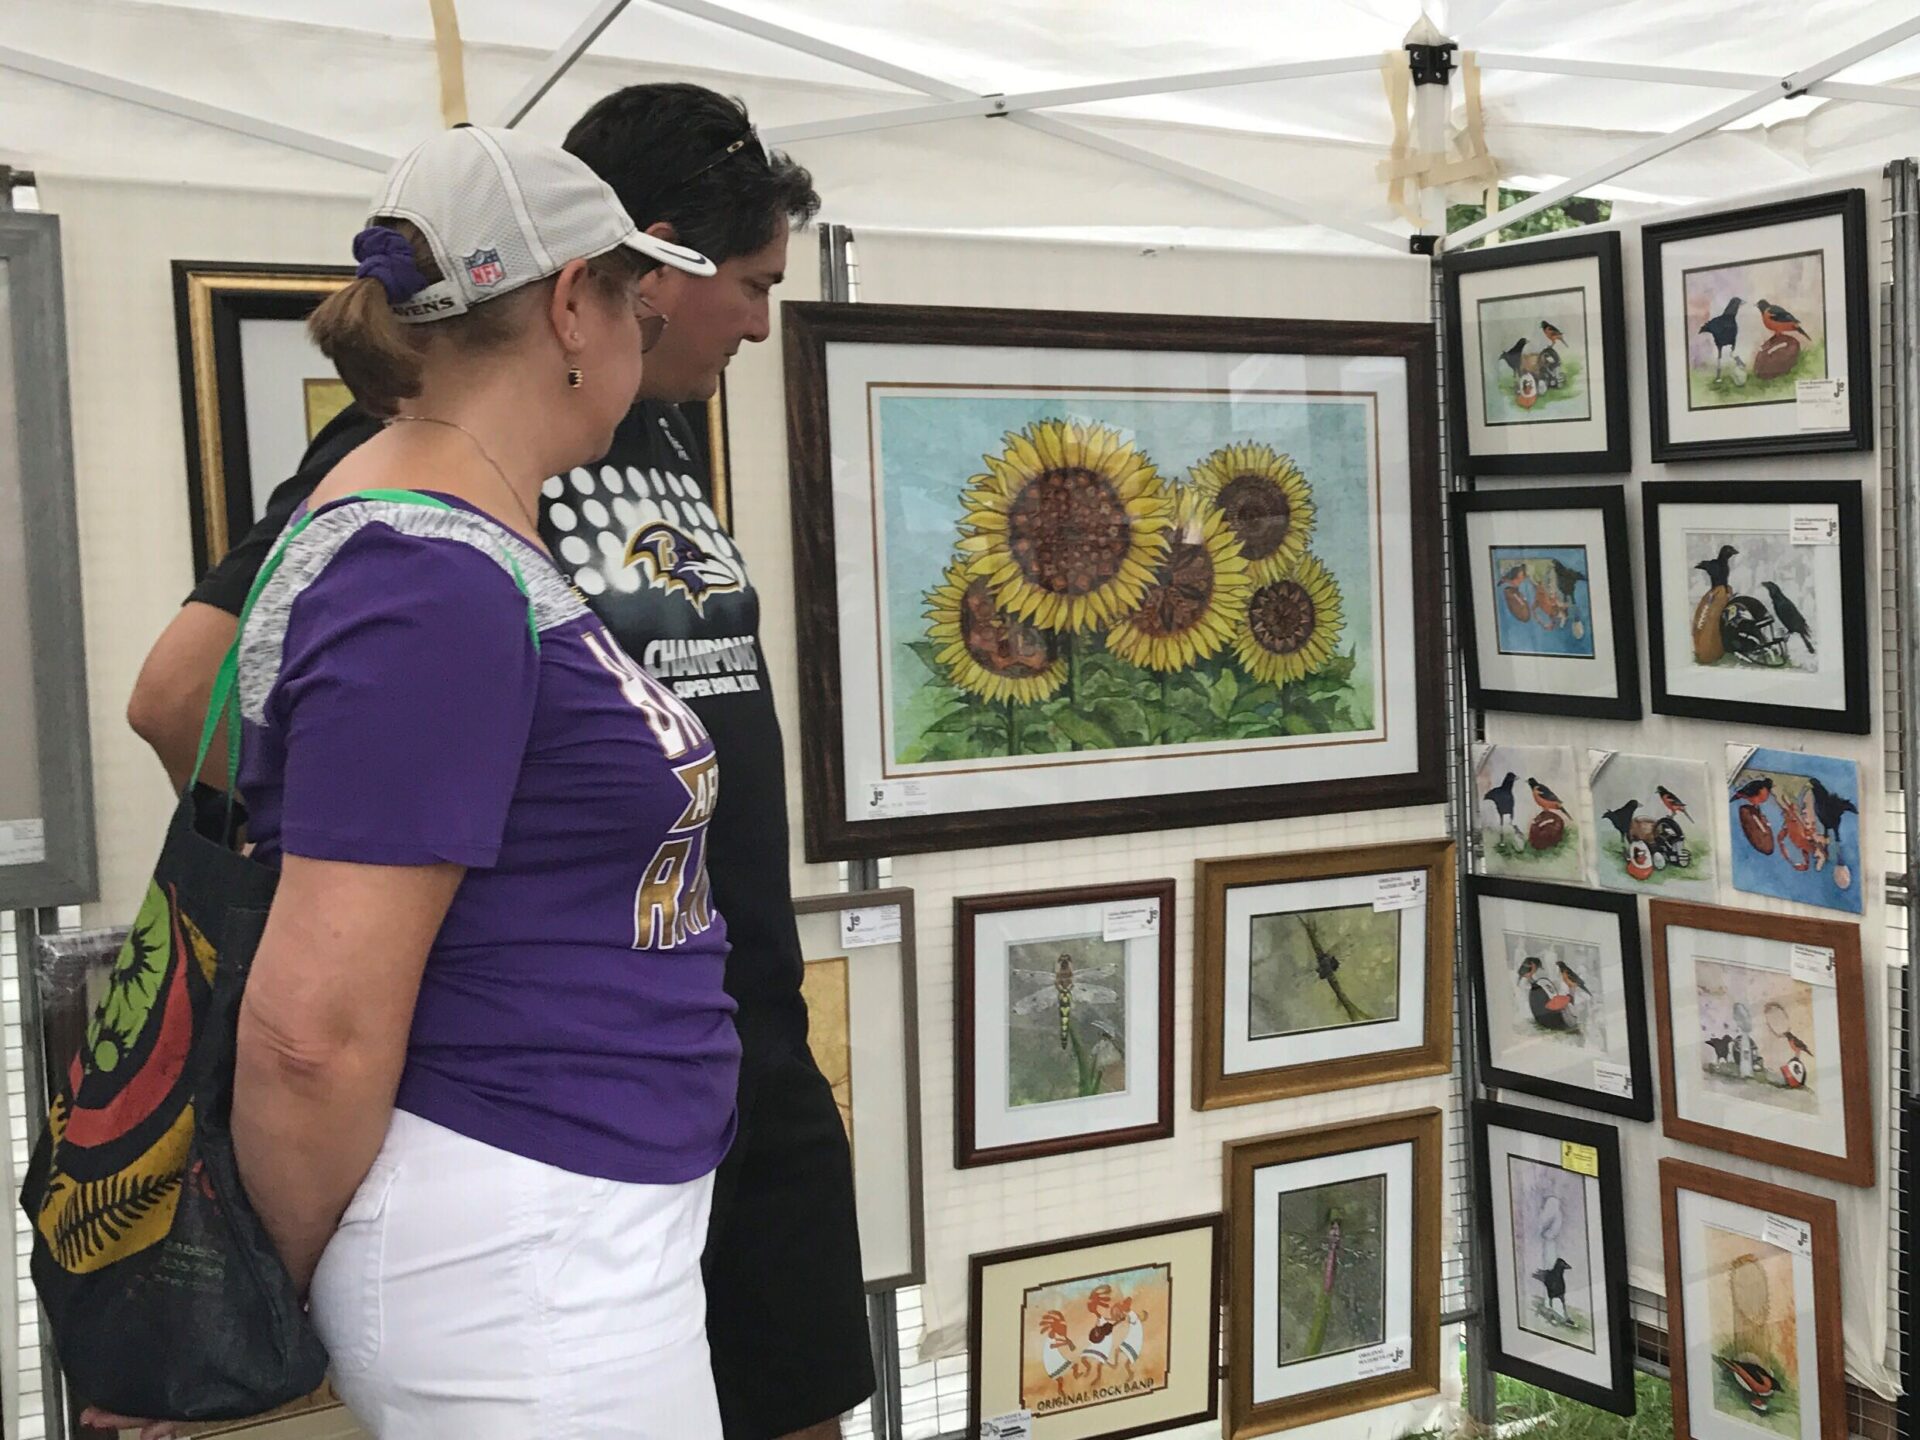 Fall Kicks off with Bel Air Festival for the Arts Bel Air Arts